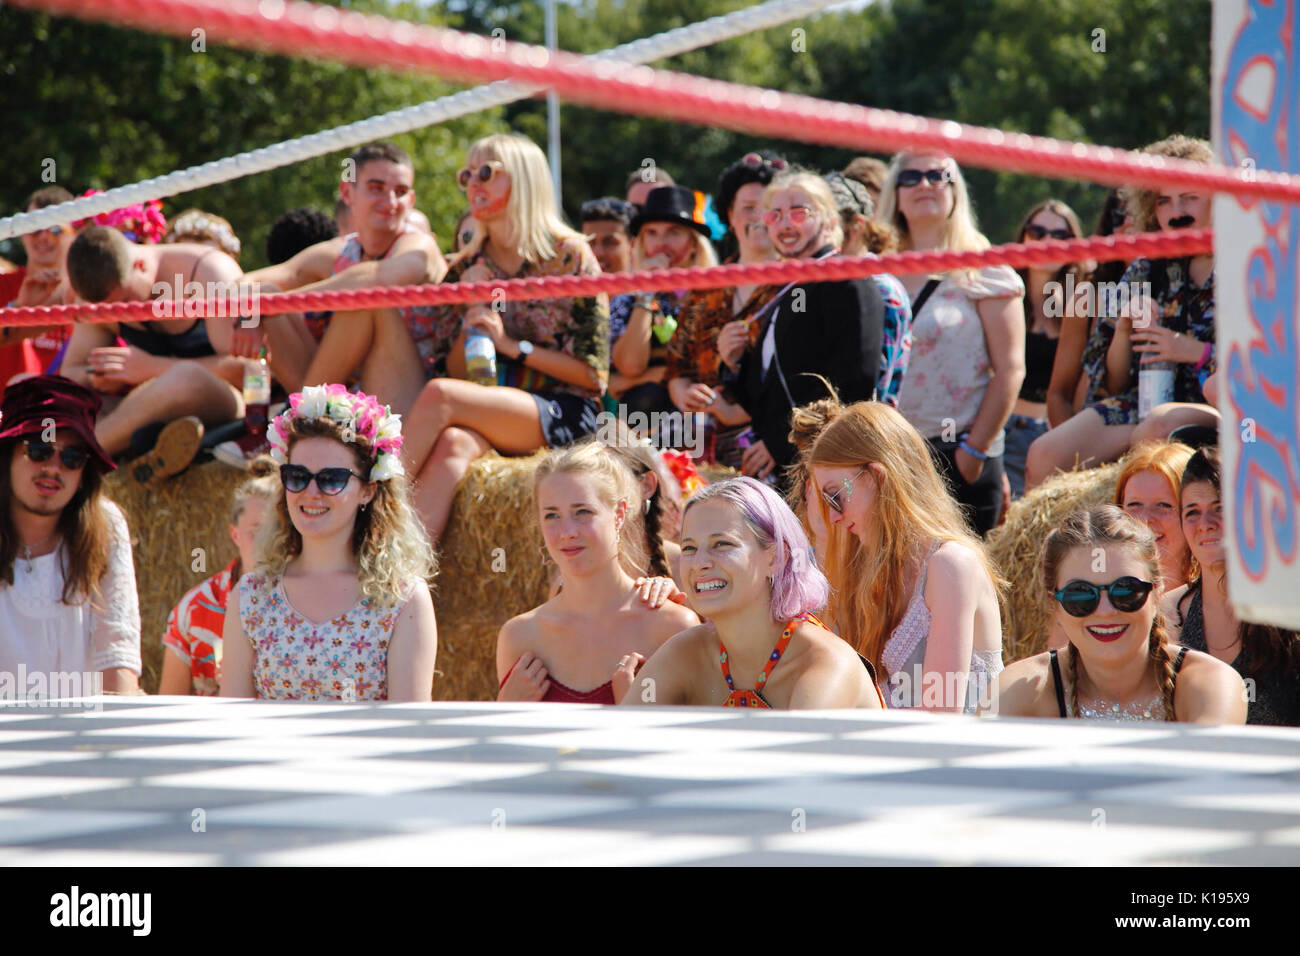 Northampton, UK. 25th August, 2017. The alternative festival famed for authentic music, crazy fancy dress and enthusiastic energy continues today under sunny skies on the Kelmarsh Estate. Credit: Wayne Farrell/Alamy Live News Stock Photo